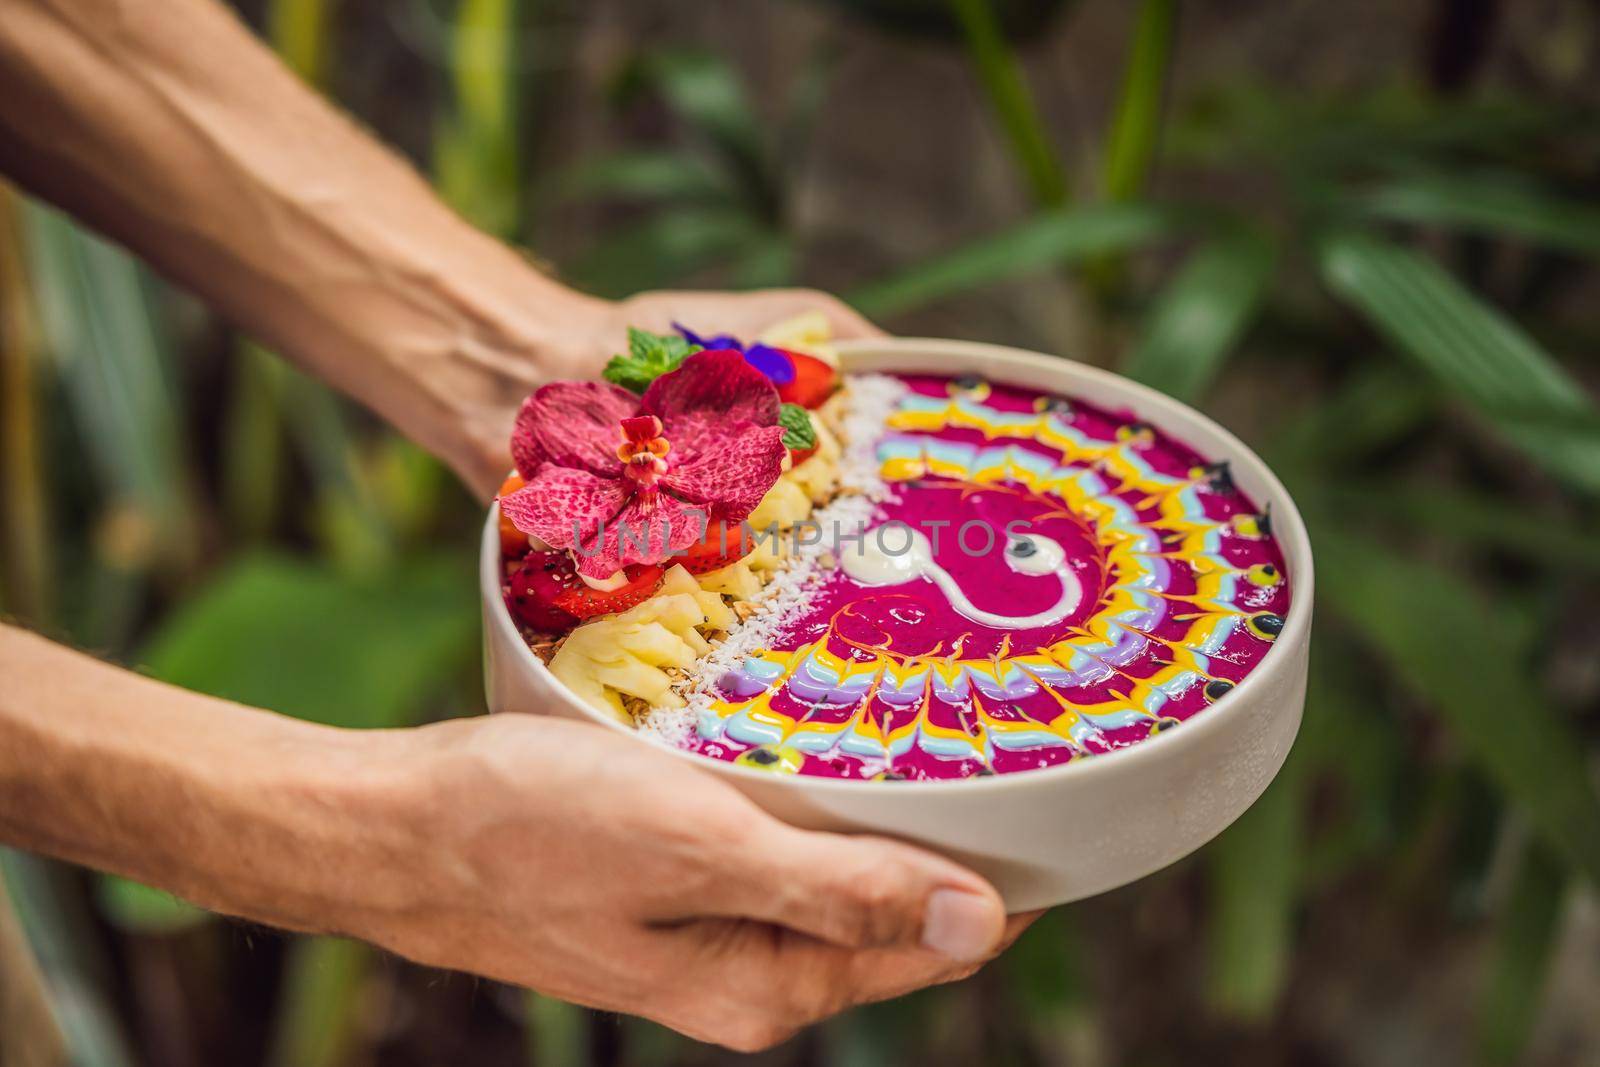 Young man having a mediterranean breakfast, eats Healthy tropical breakfast, smoothie bowl with tropical fruits, decorated with a pattern of colorful yogurt with turmeric and spirulina. It is also decorated with fruits, flowers, chia seeds, coconut, granola, pineapple, mint and strawberries.